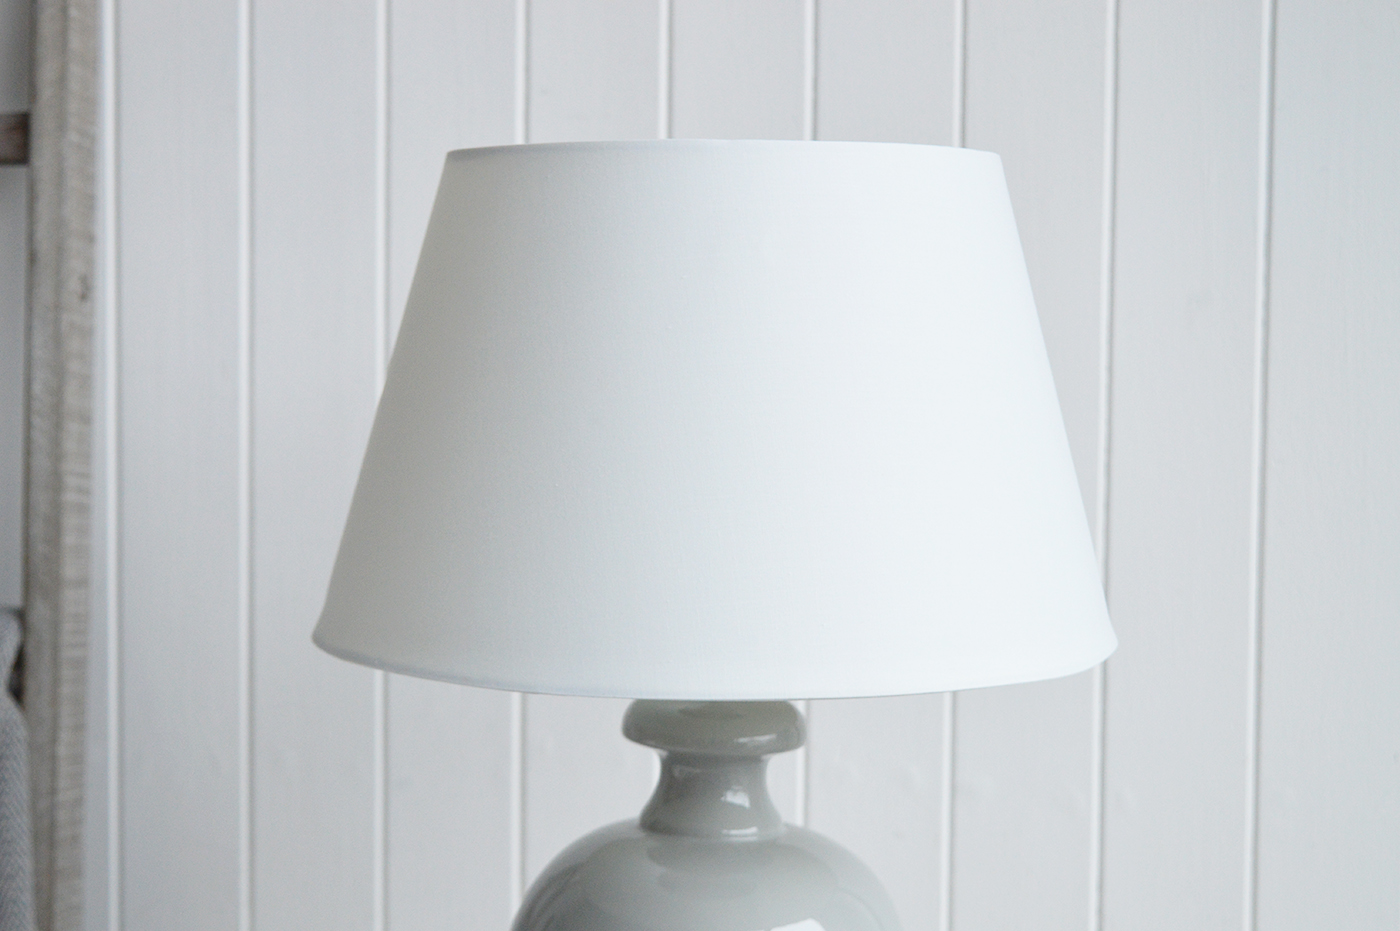 Pembroke Ceramic Large Grey Blue Lamp from The White Lighthouse Furniture. A feature lamp on any table in mocern farmhouse, coastal or country styled home interior